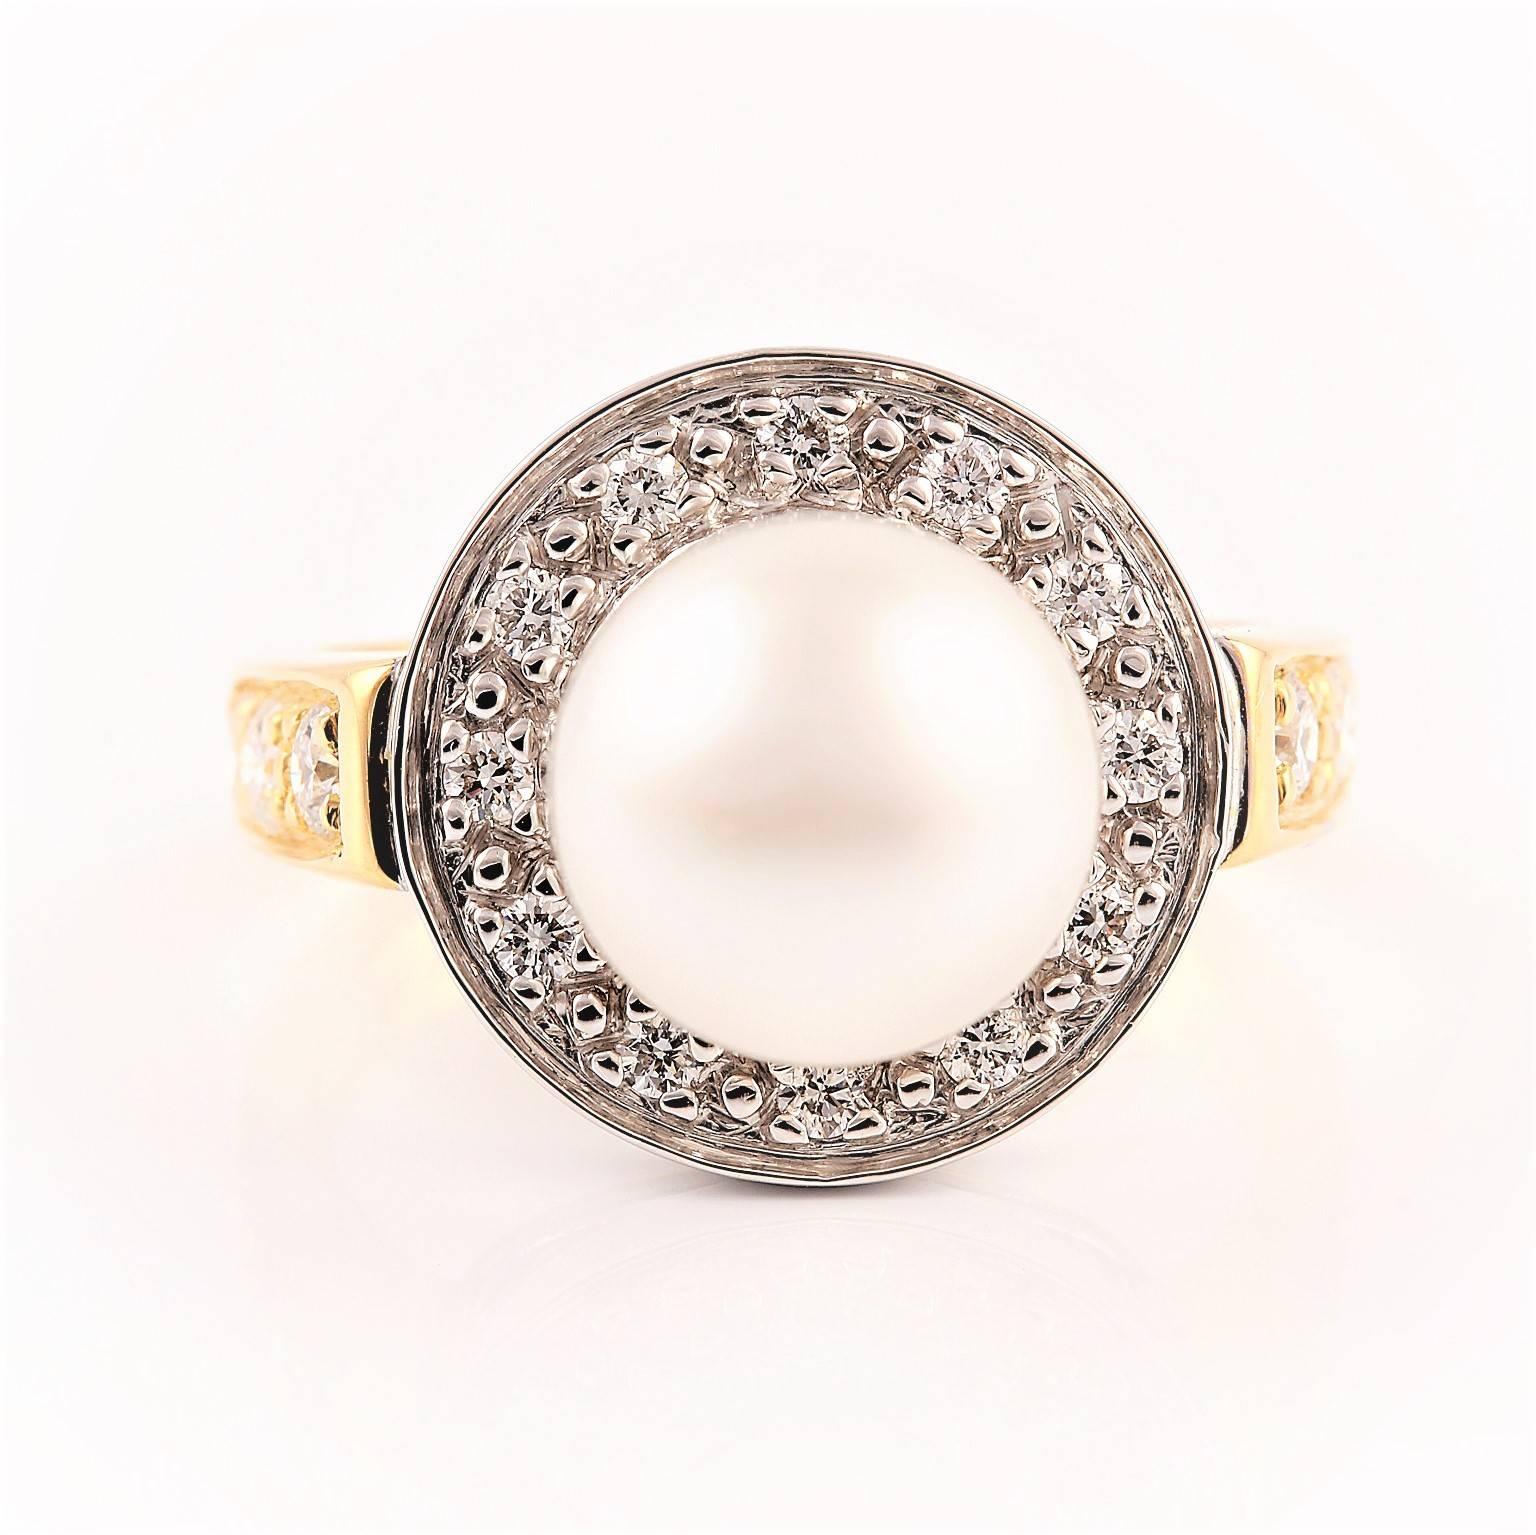 Princess Perla Ring

This timeless design features a beautiful South Sea pearl set atop the circular 18ct white gold diamond setting. The yellow gold band is also bead set with petite diamonds.

South Sea pearl: high lustre, 9.50mm 

Round brilliant